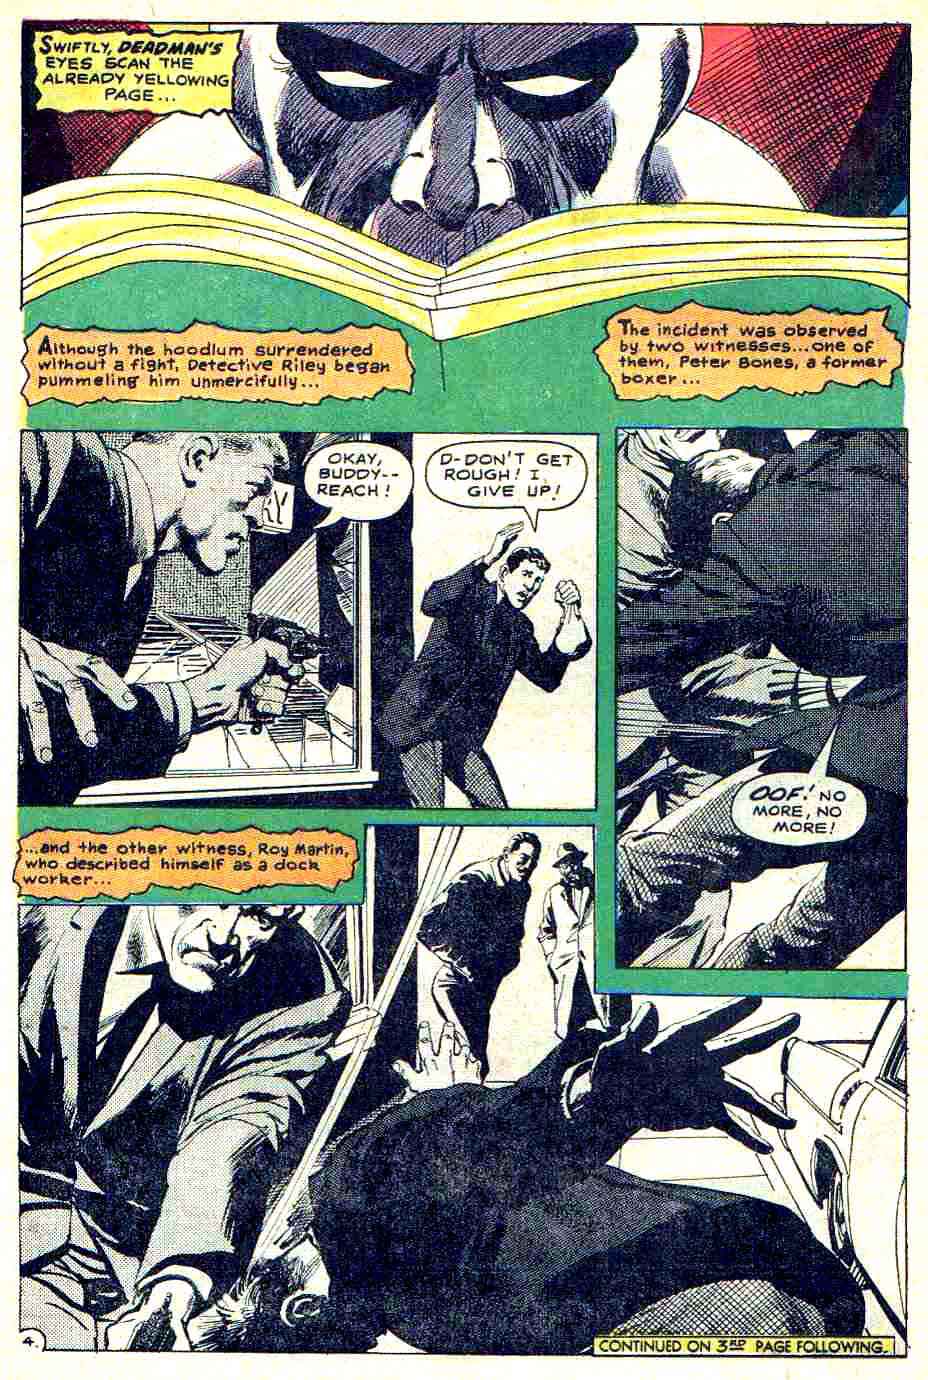 Strange Adventures v1 #210 dc 1960s silver age comic book page art by Neal Adams